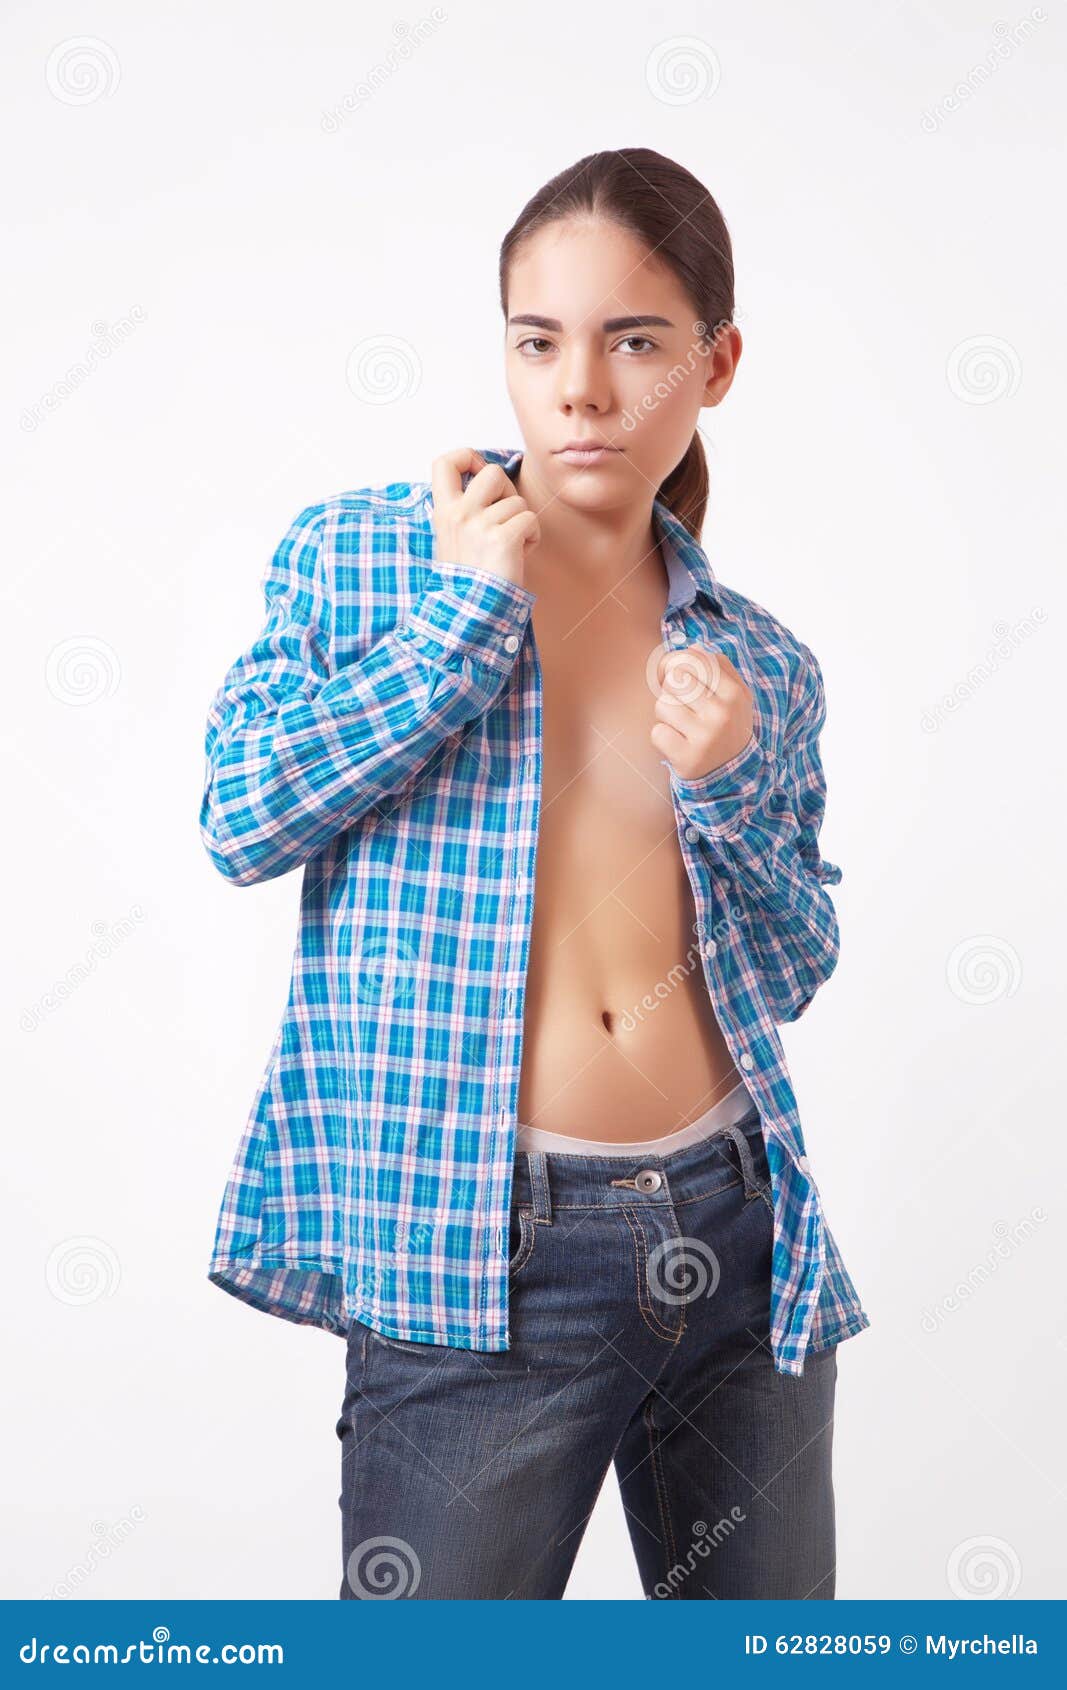 Photo about Woman in unbuttoned blue shirt and jeans. 